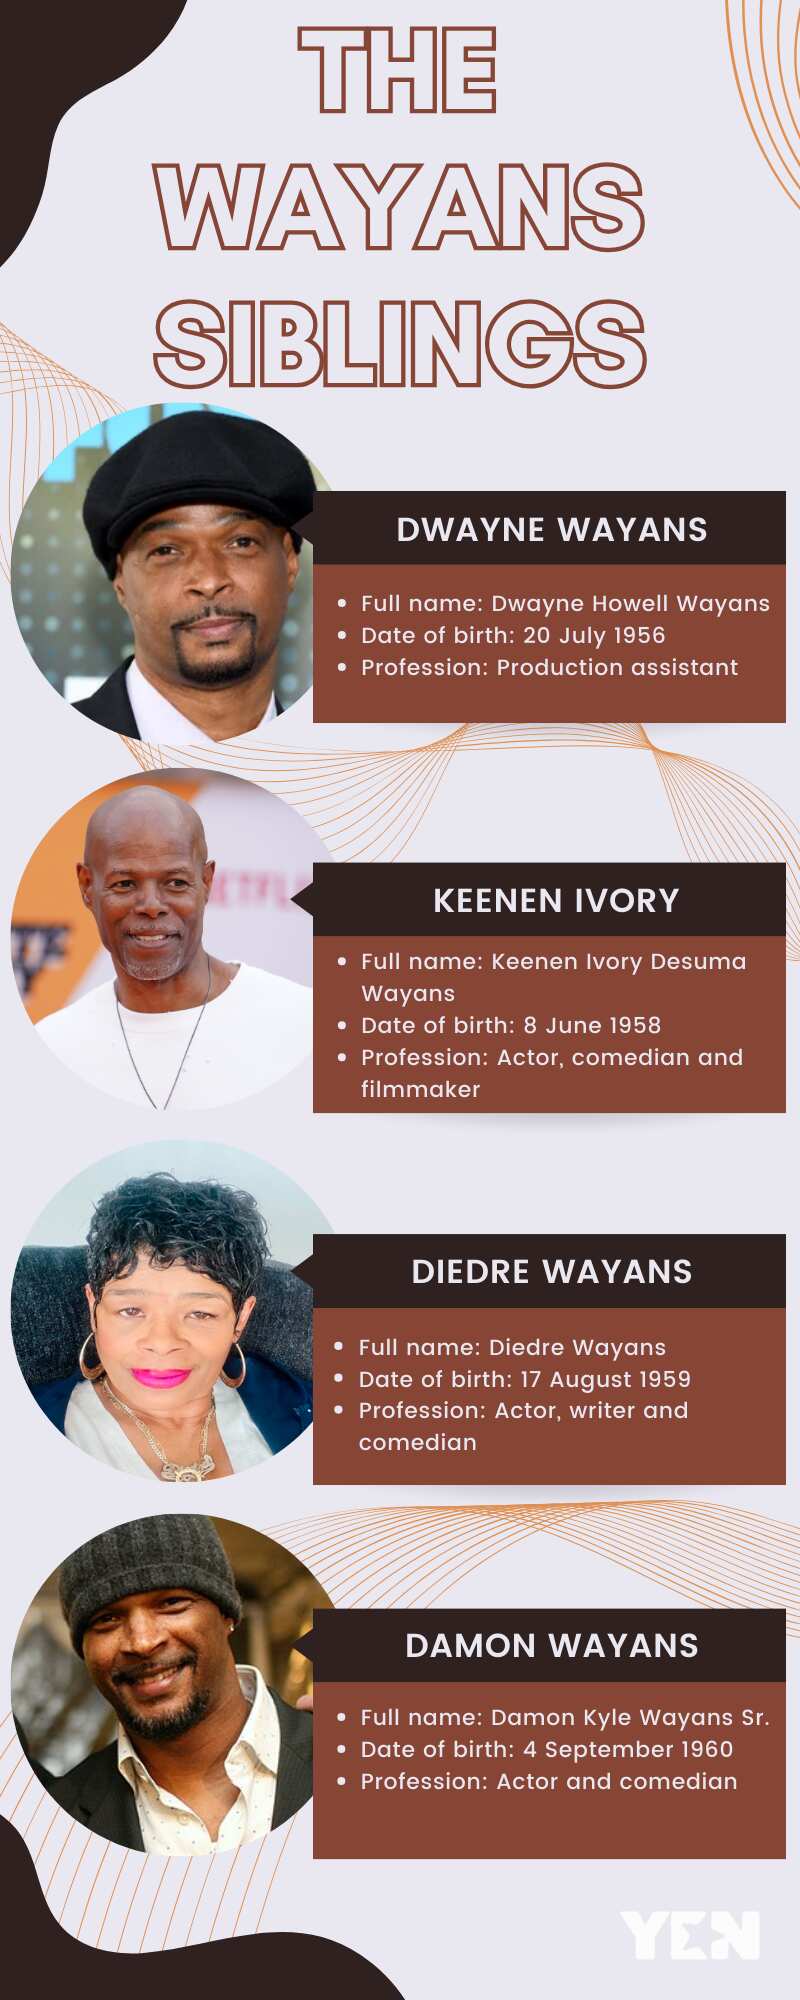 How many siblings are in the Wayans family?